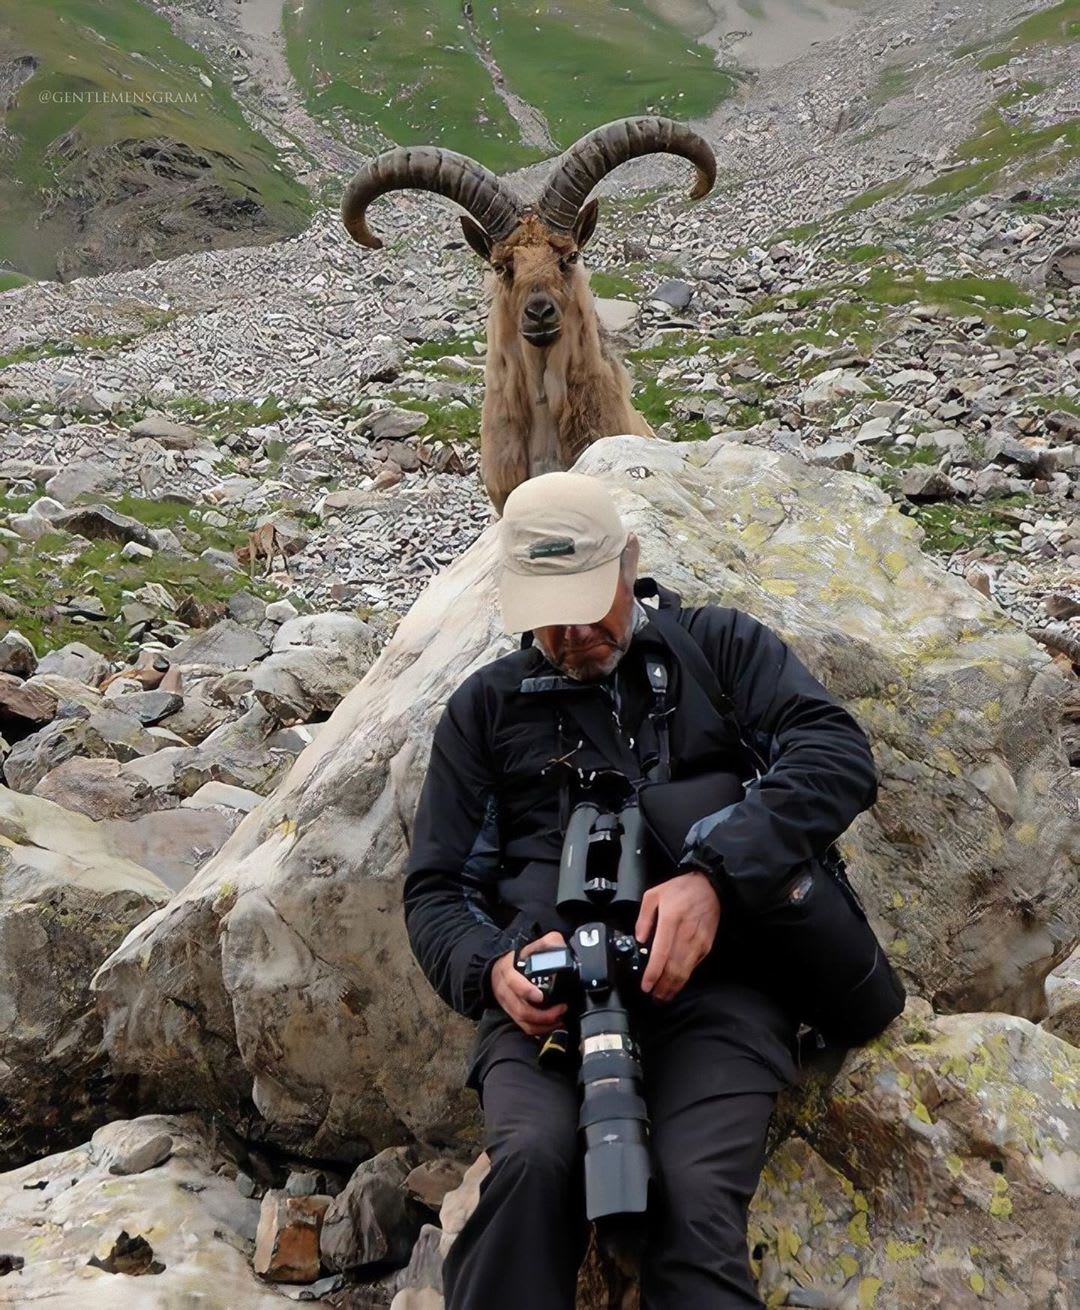 This Longhorn Goat Sneaking Up On A Wildlife Photographer